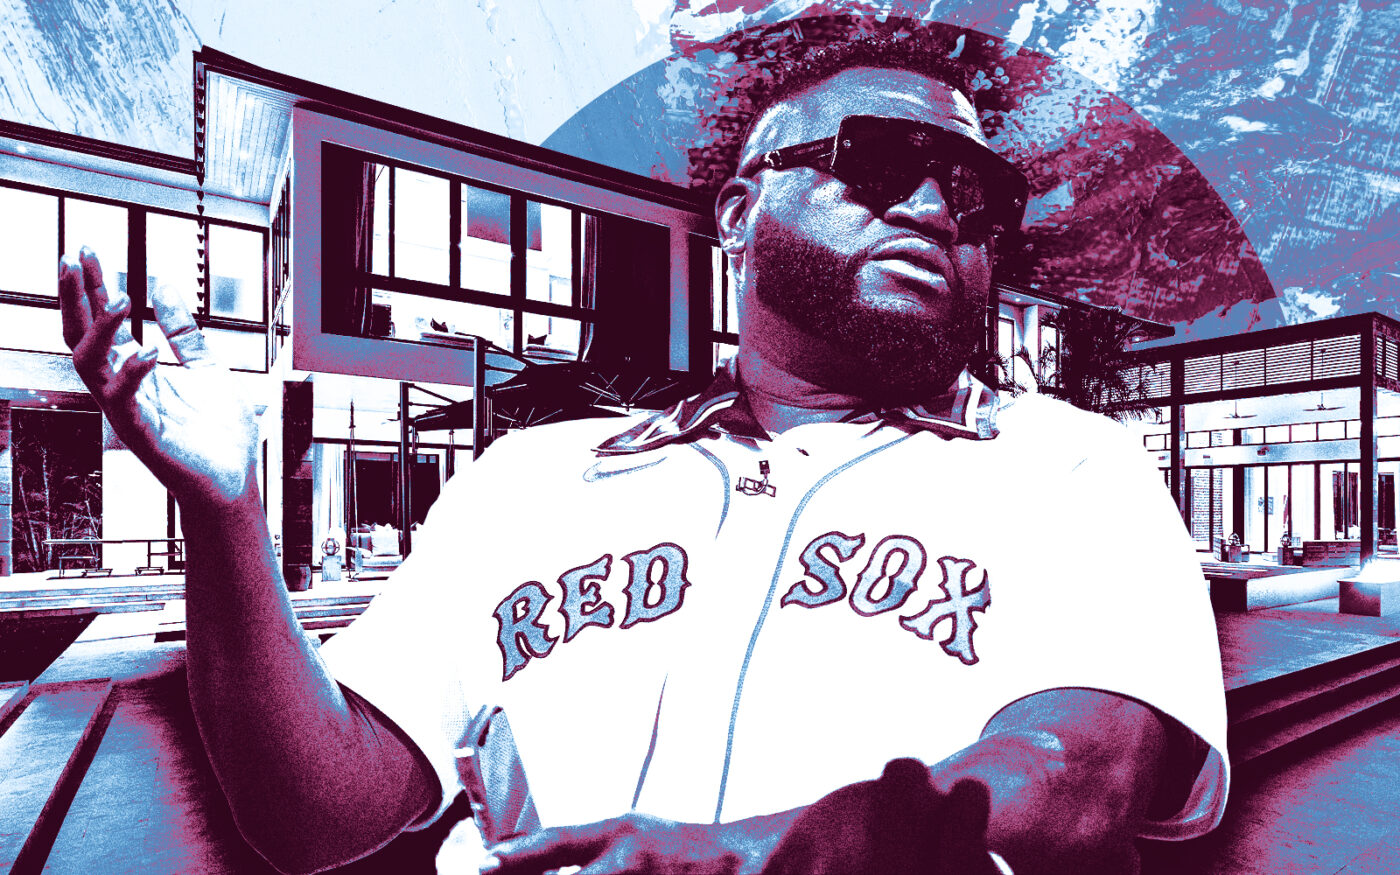 David Ortiz and 9505 Southwest 63rd Court in Pinecrest (Photo Illustration by Steven Dilakian for The Real Deal with Getty, OAK Studios, and One Sotheby’s International Realty)